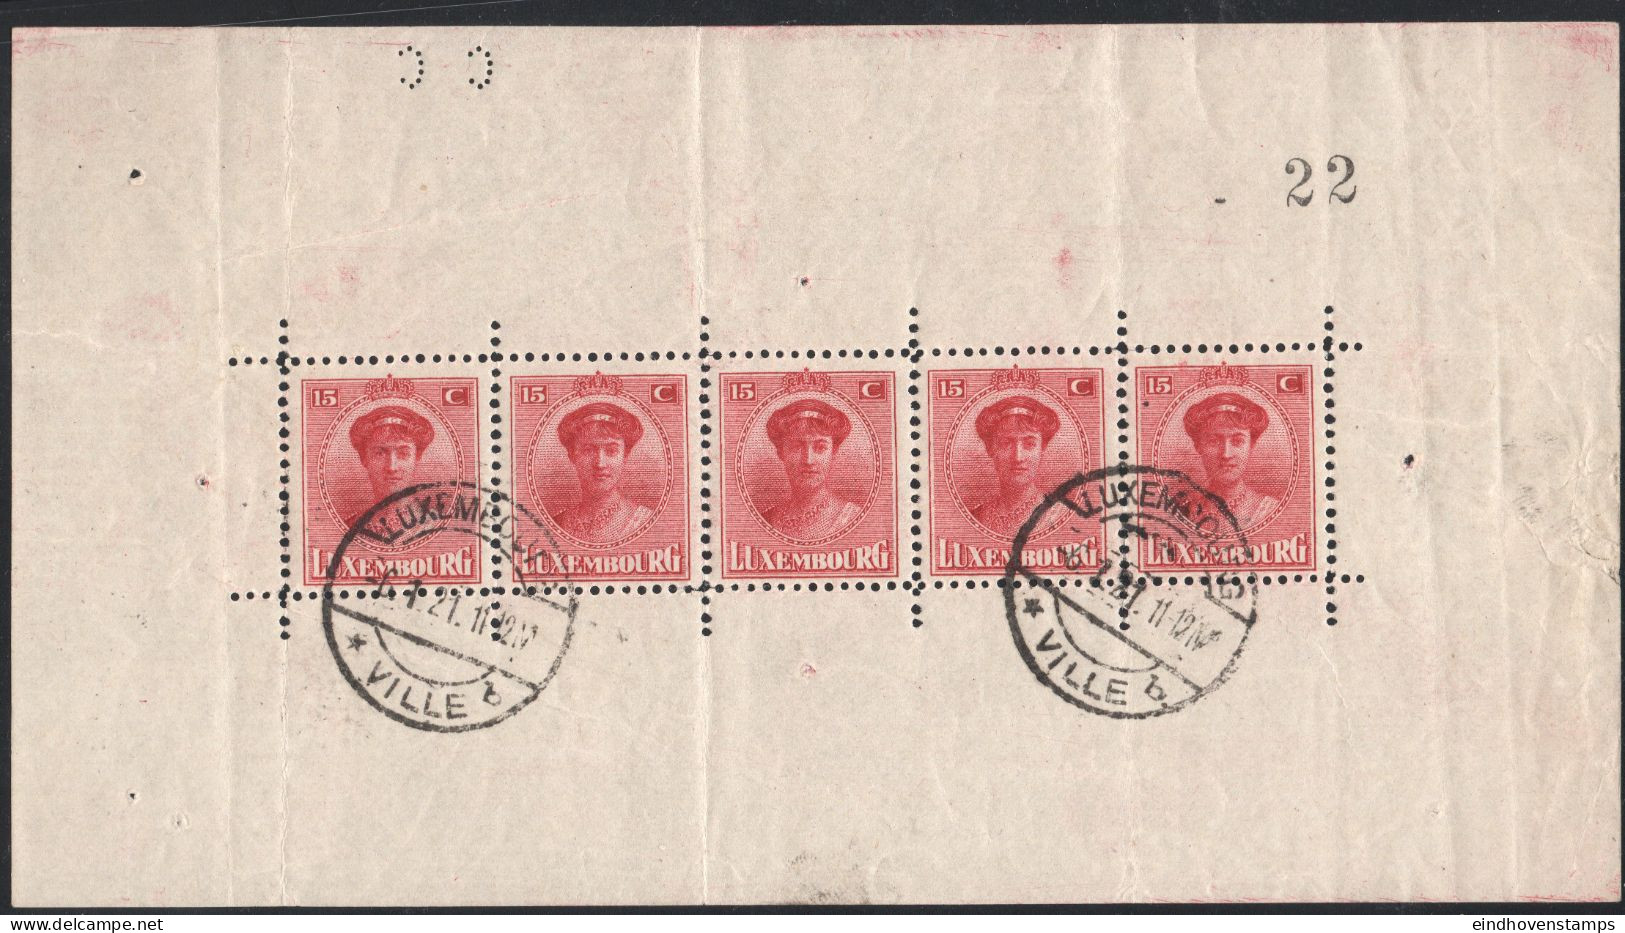 Luxemburg 1921 Jan 6 Minisheet Of 5 Stamps Charlotte FDC Cancel Folds And Usual Wrinkles Outside The Stamps - 1921-27 Charlotte Frontansicht